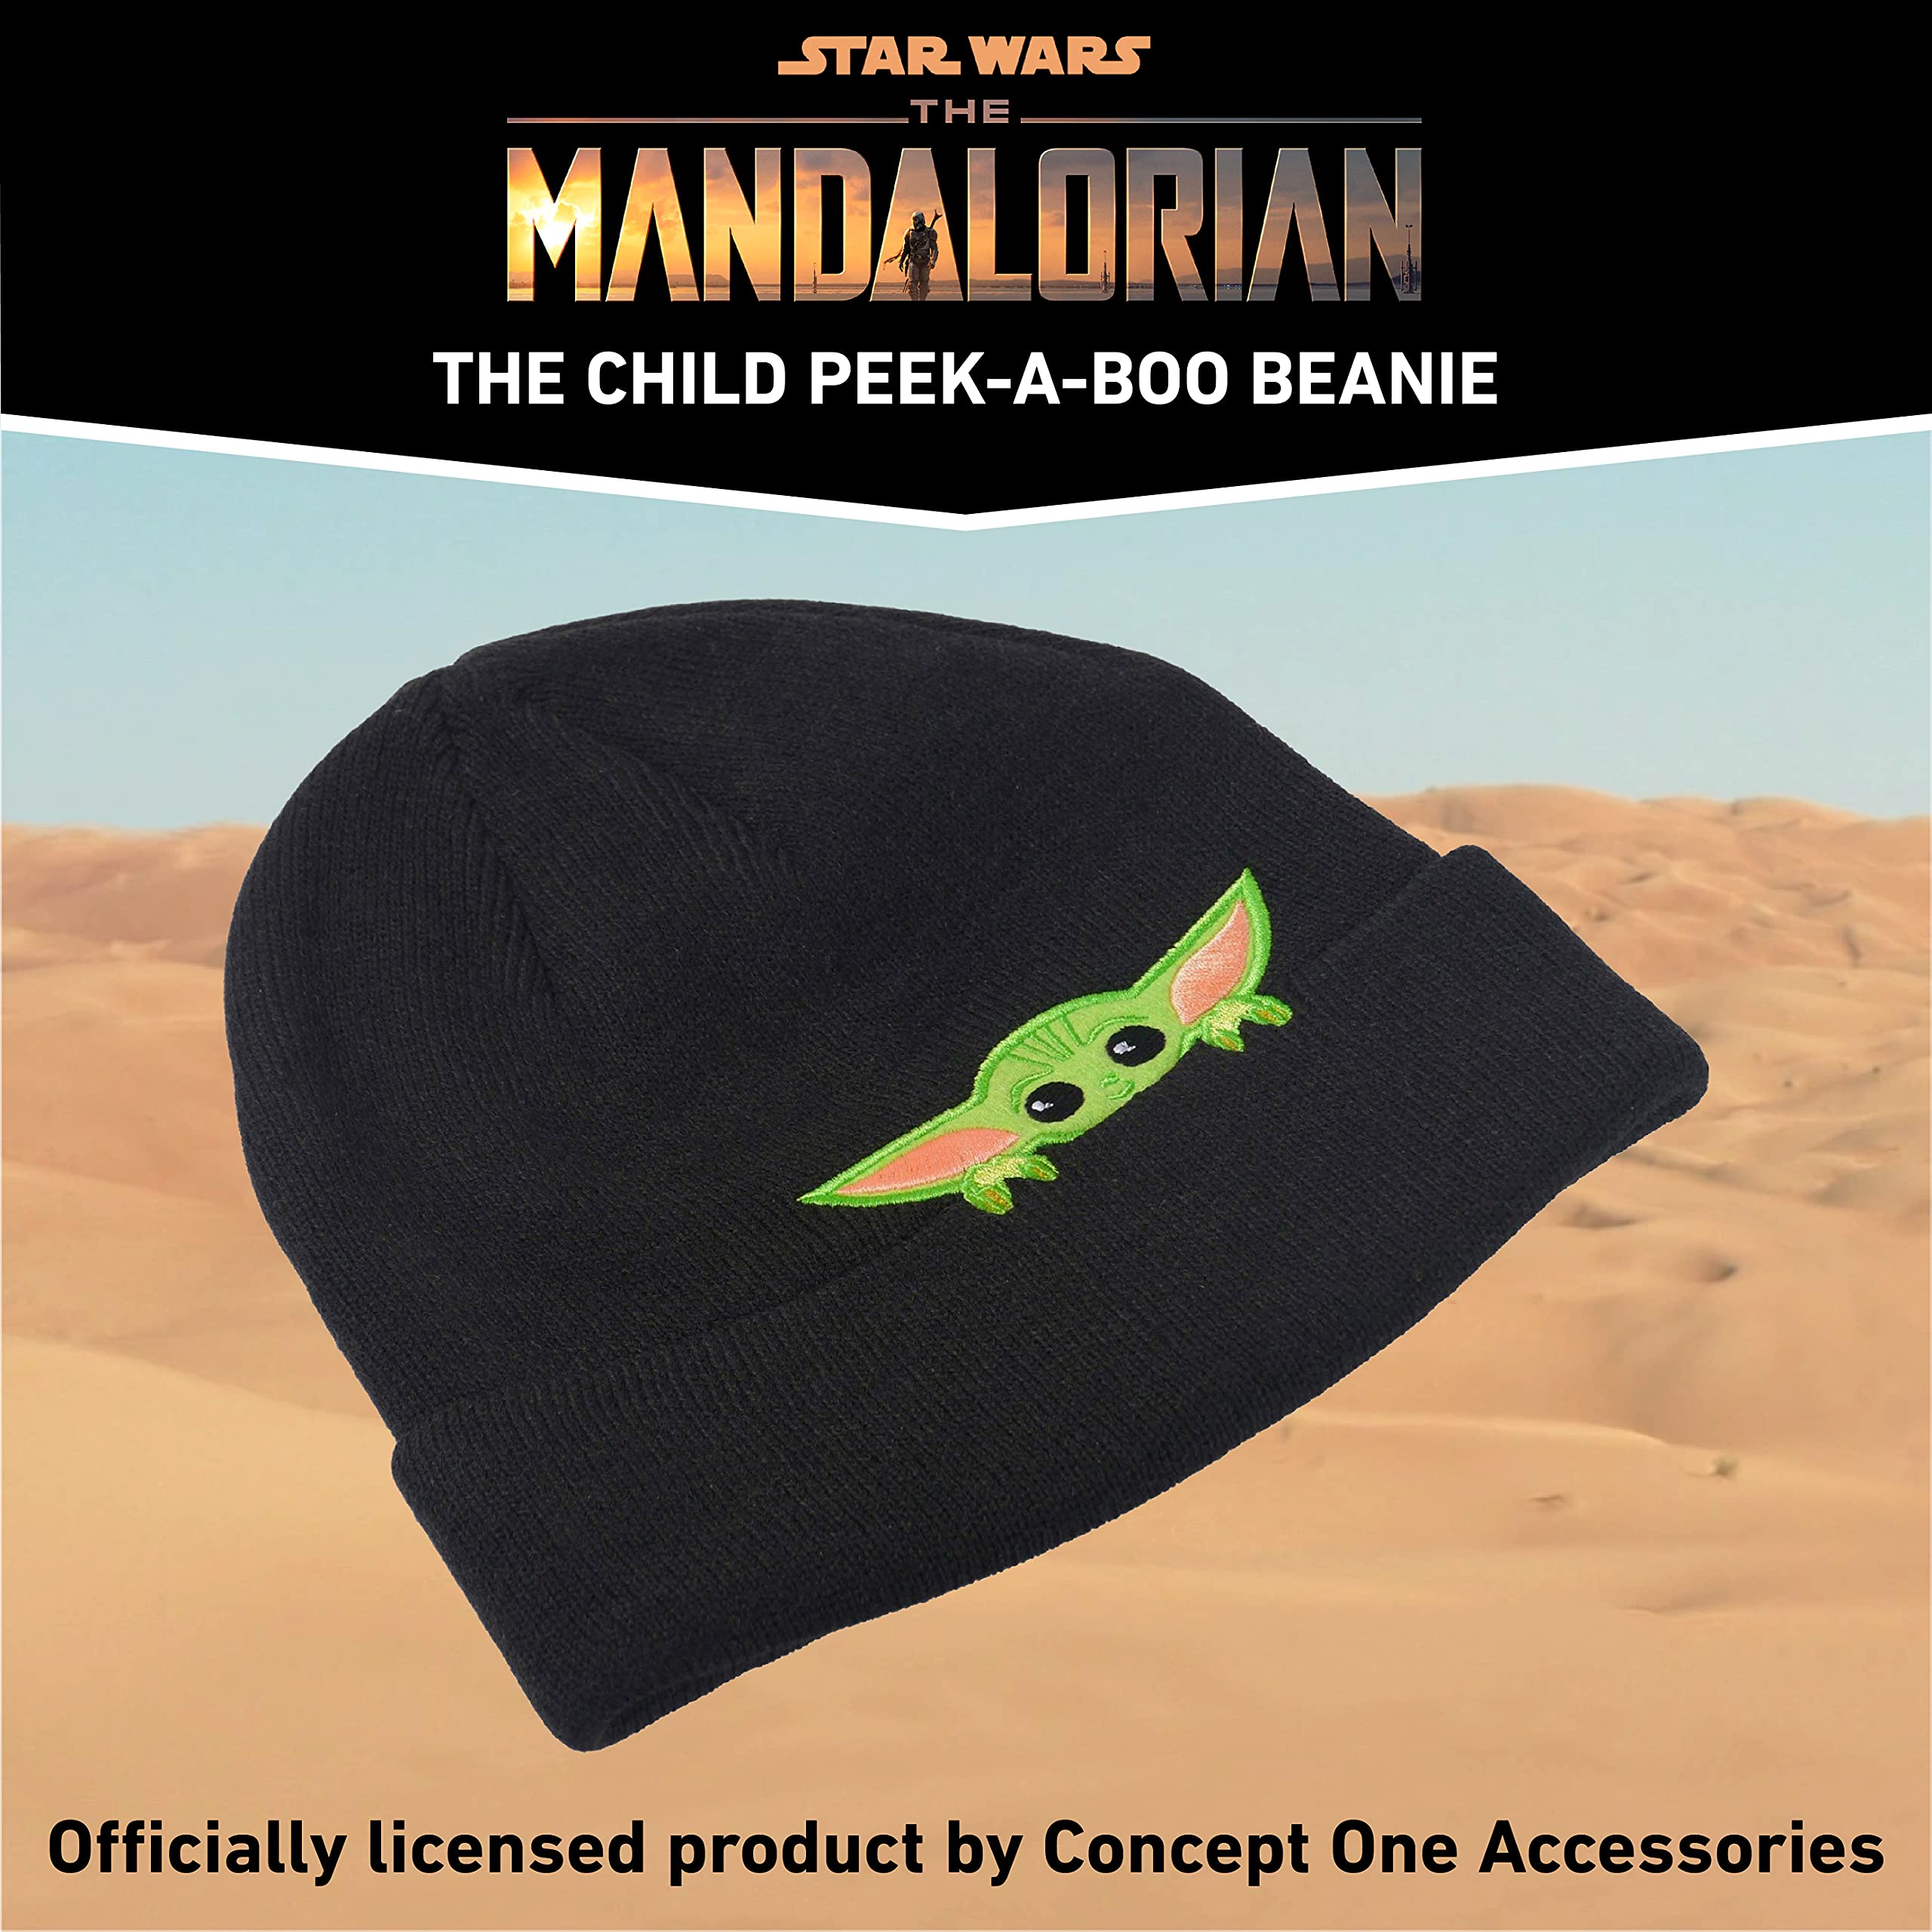 Concept One Star Wars The Mandalorian The Child Peek-A-Boo Beanie, Black, One Size